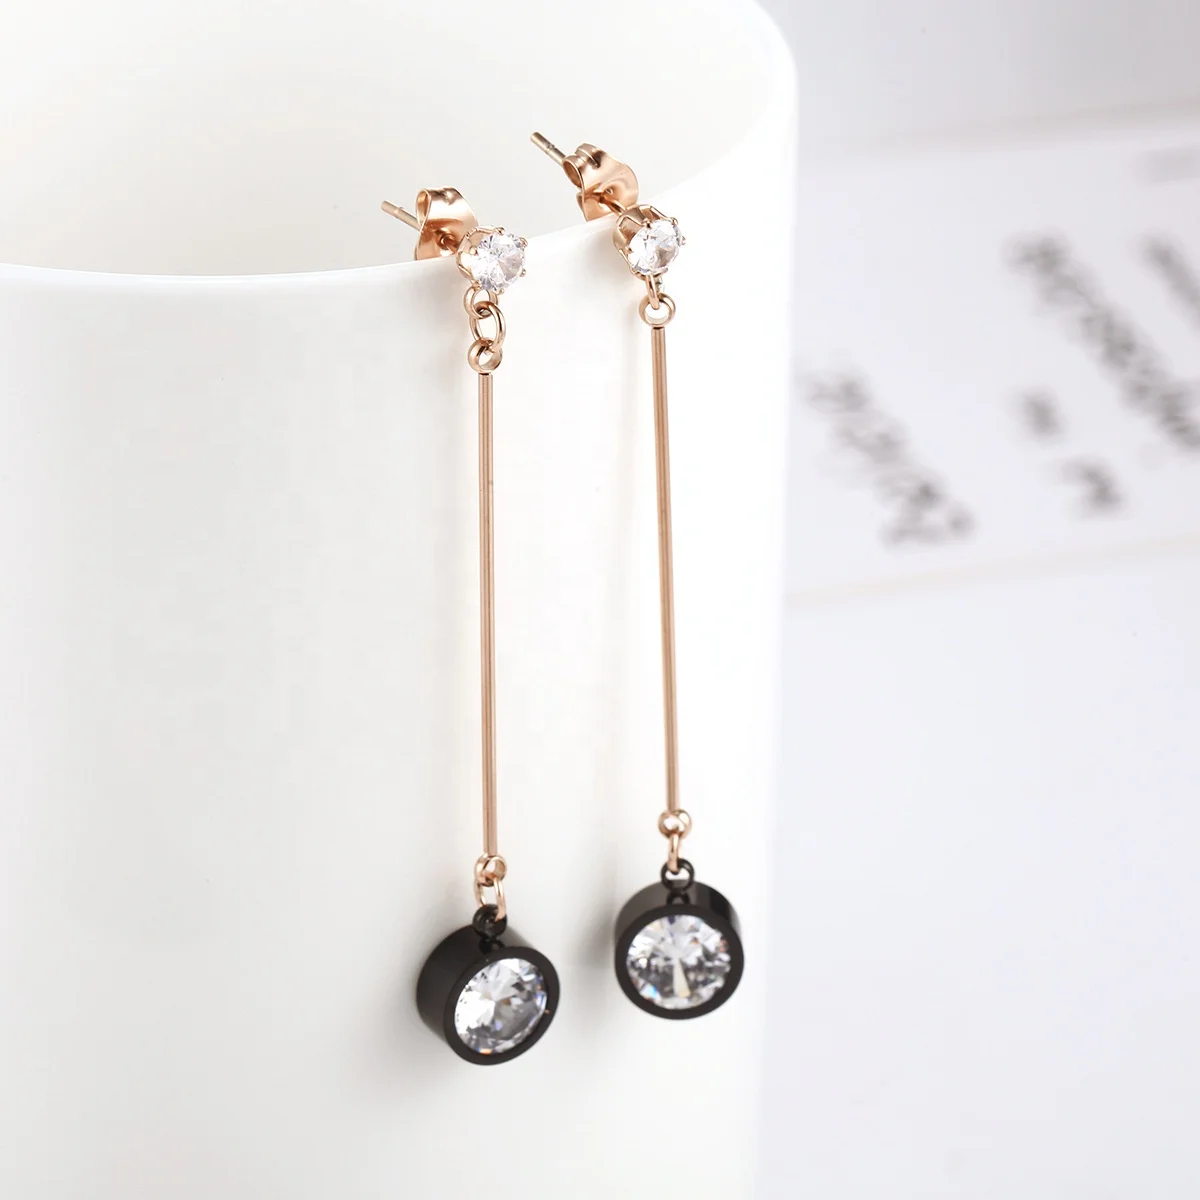 

Fashion zircon earrings drop style stainless steel rose gold plated stud earrings cheap personalized earrings, Picture shows